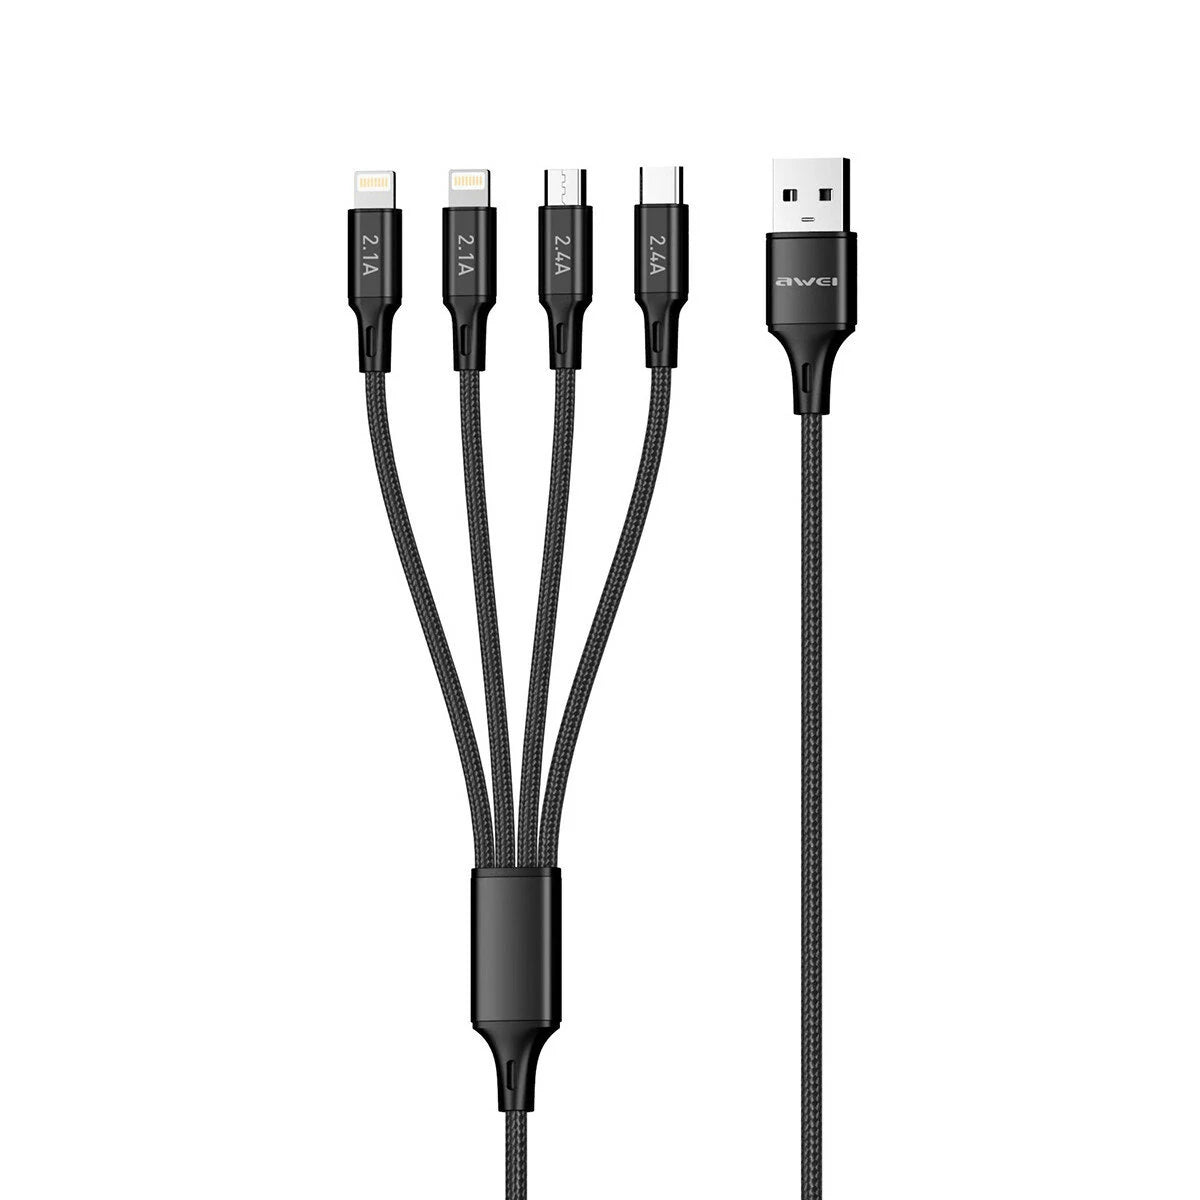 Awei Multi USB 4 in 1 Data Cable 2.4A Fast - Black